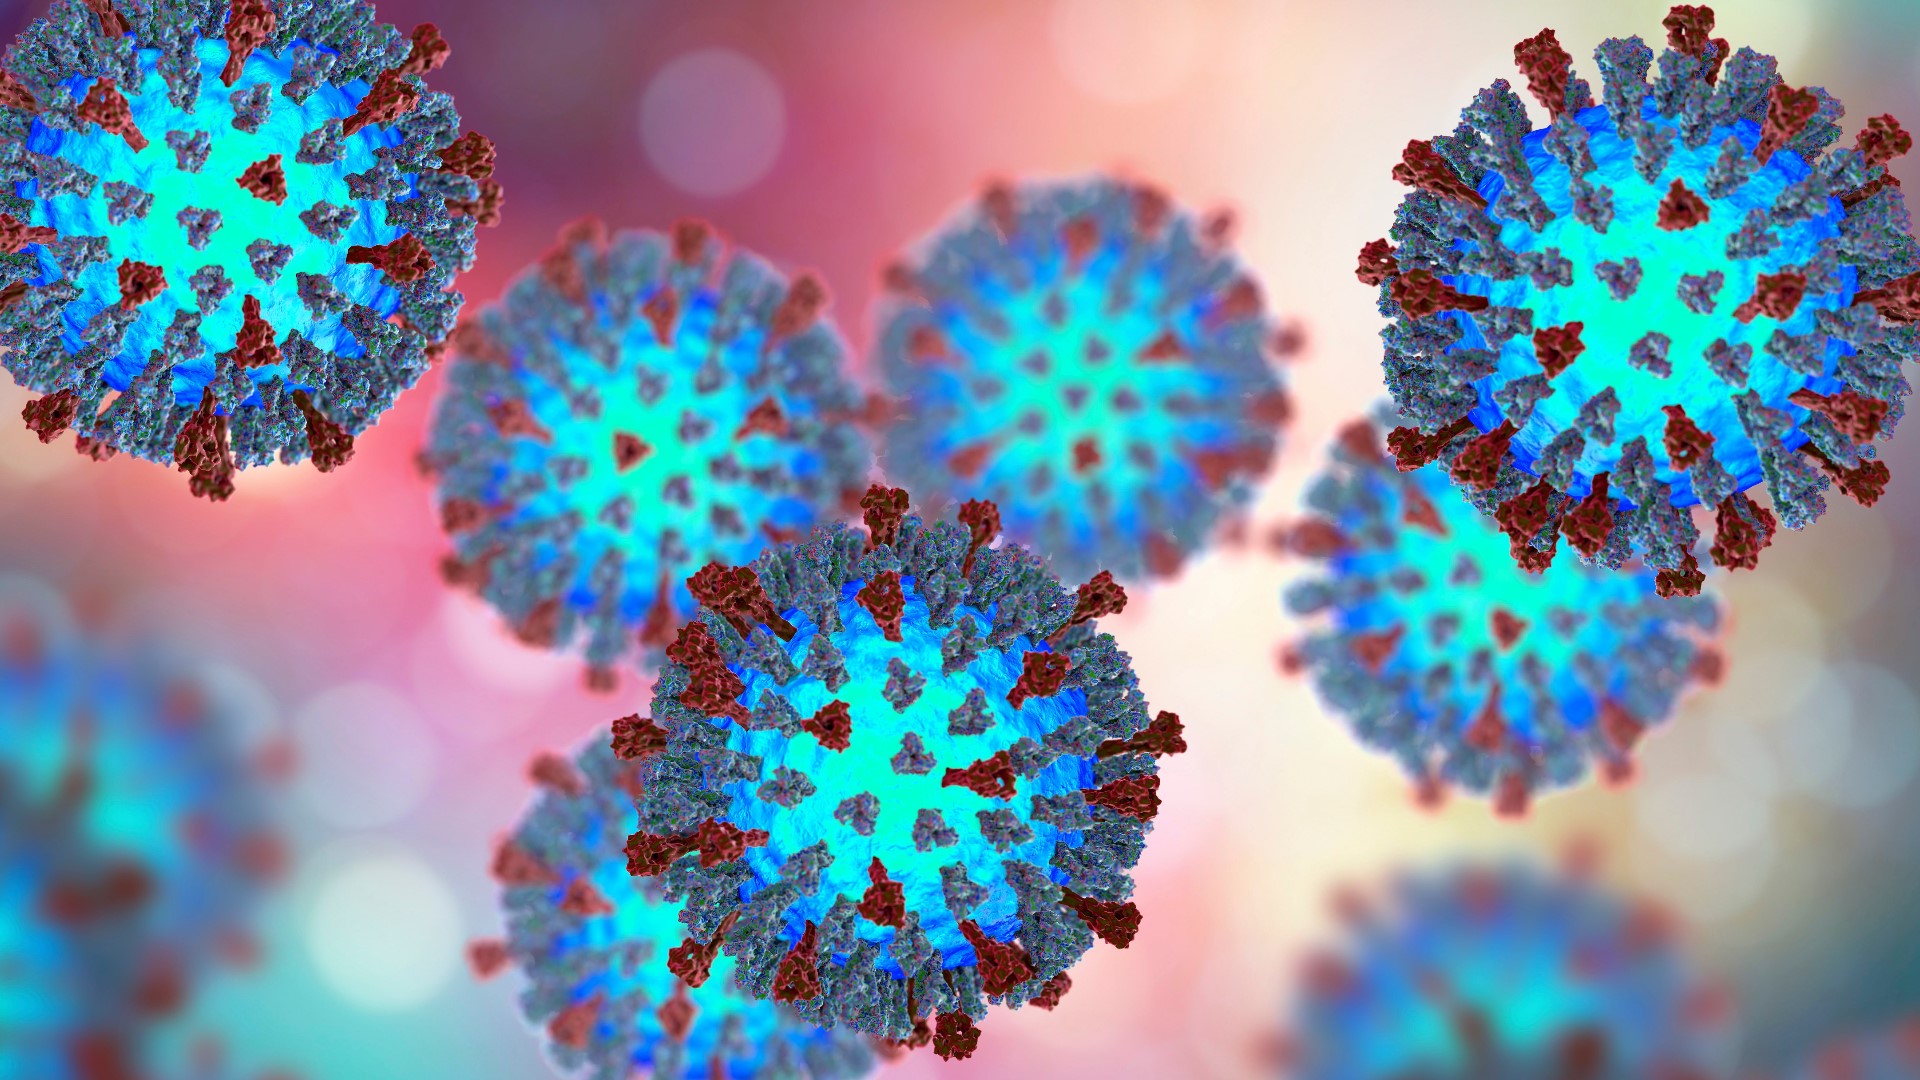 A student at Aki Kurose middle school in Seattle tested positive for measles, prompting the school to switch to remote learning temporarily.